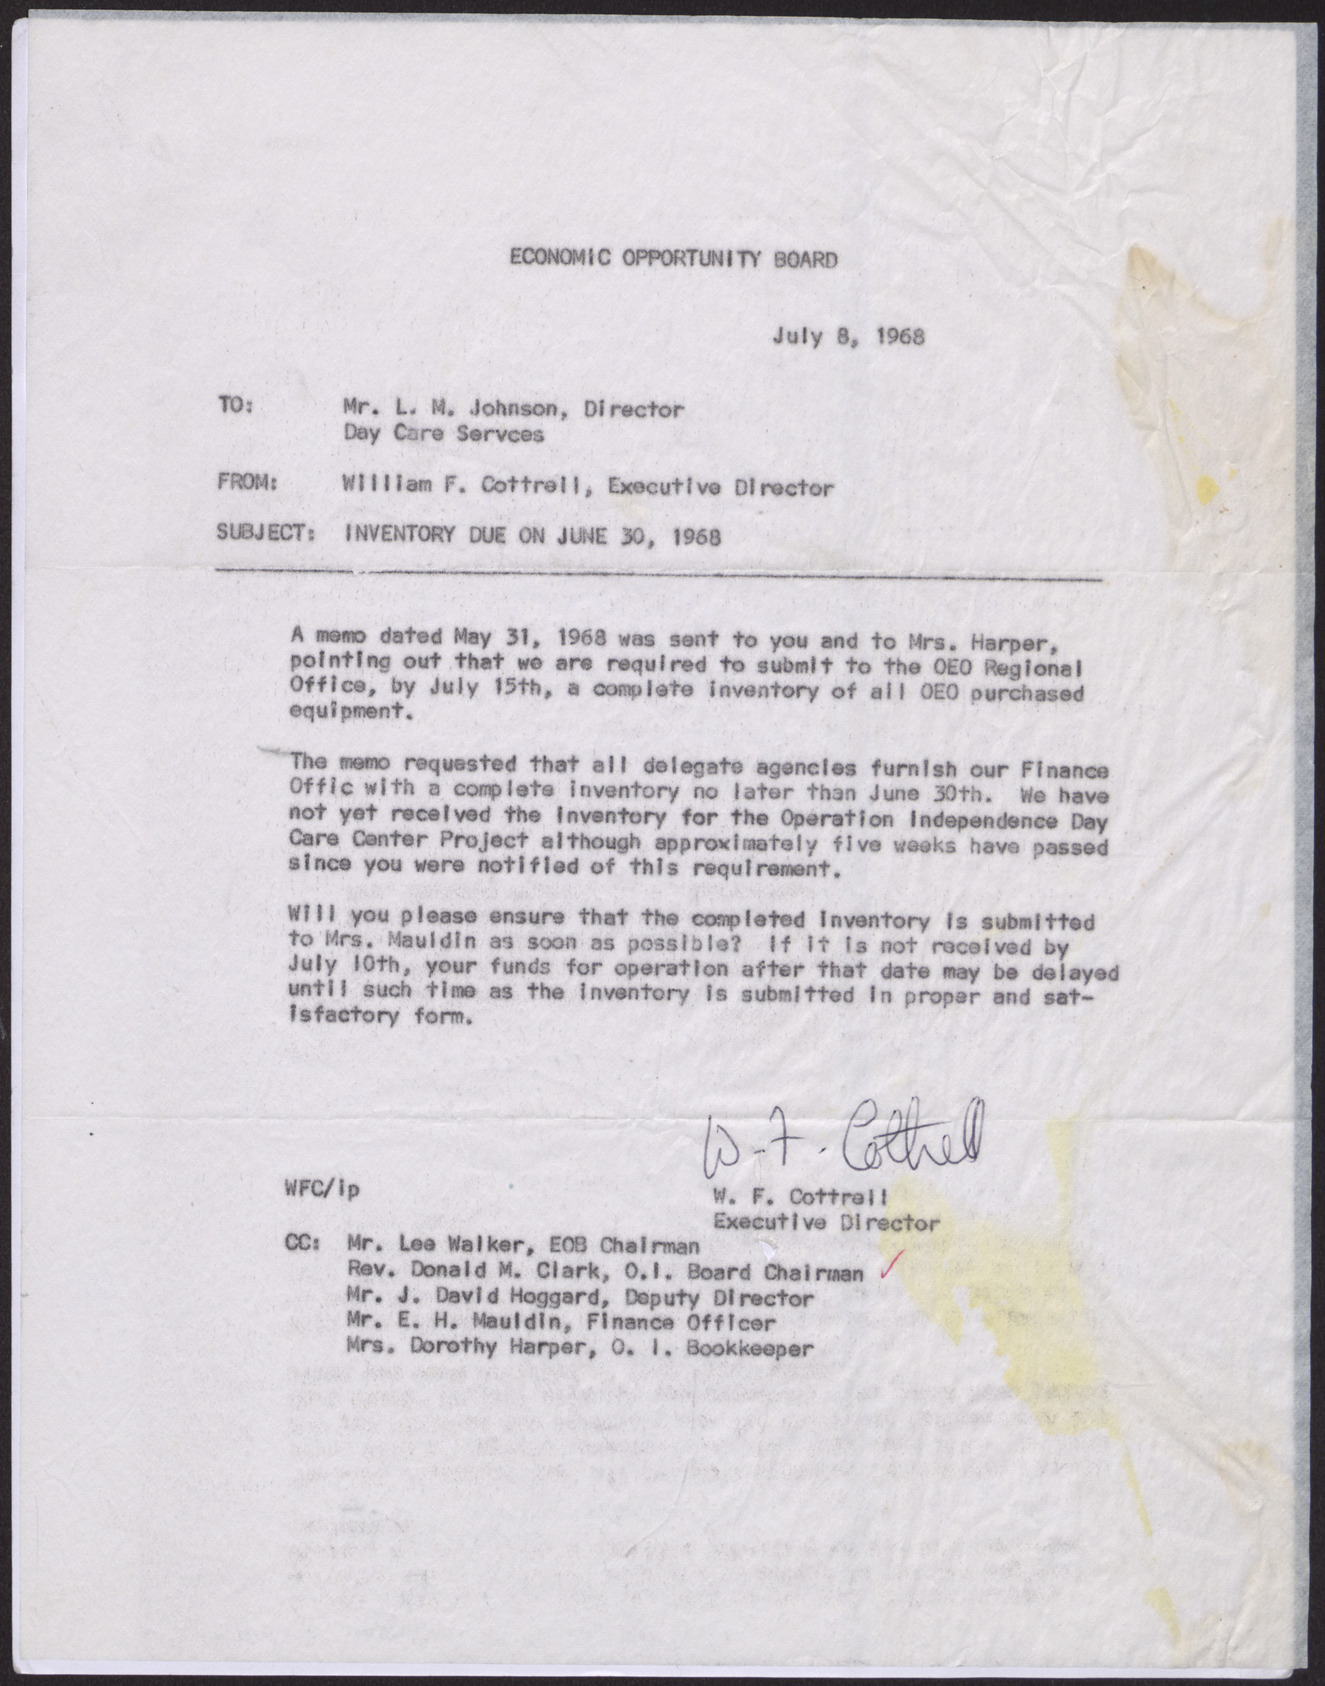 Letter to Mr. L. M. Johnson from William F. Cottrell, July 8, 1968